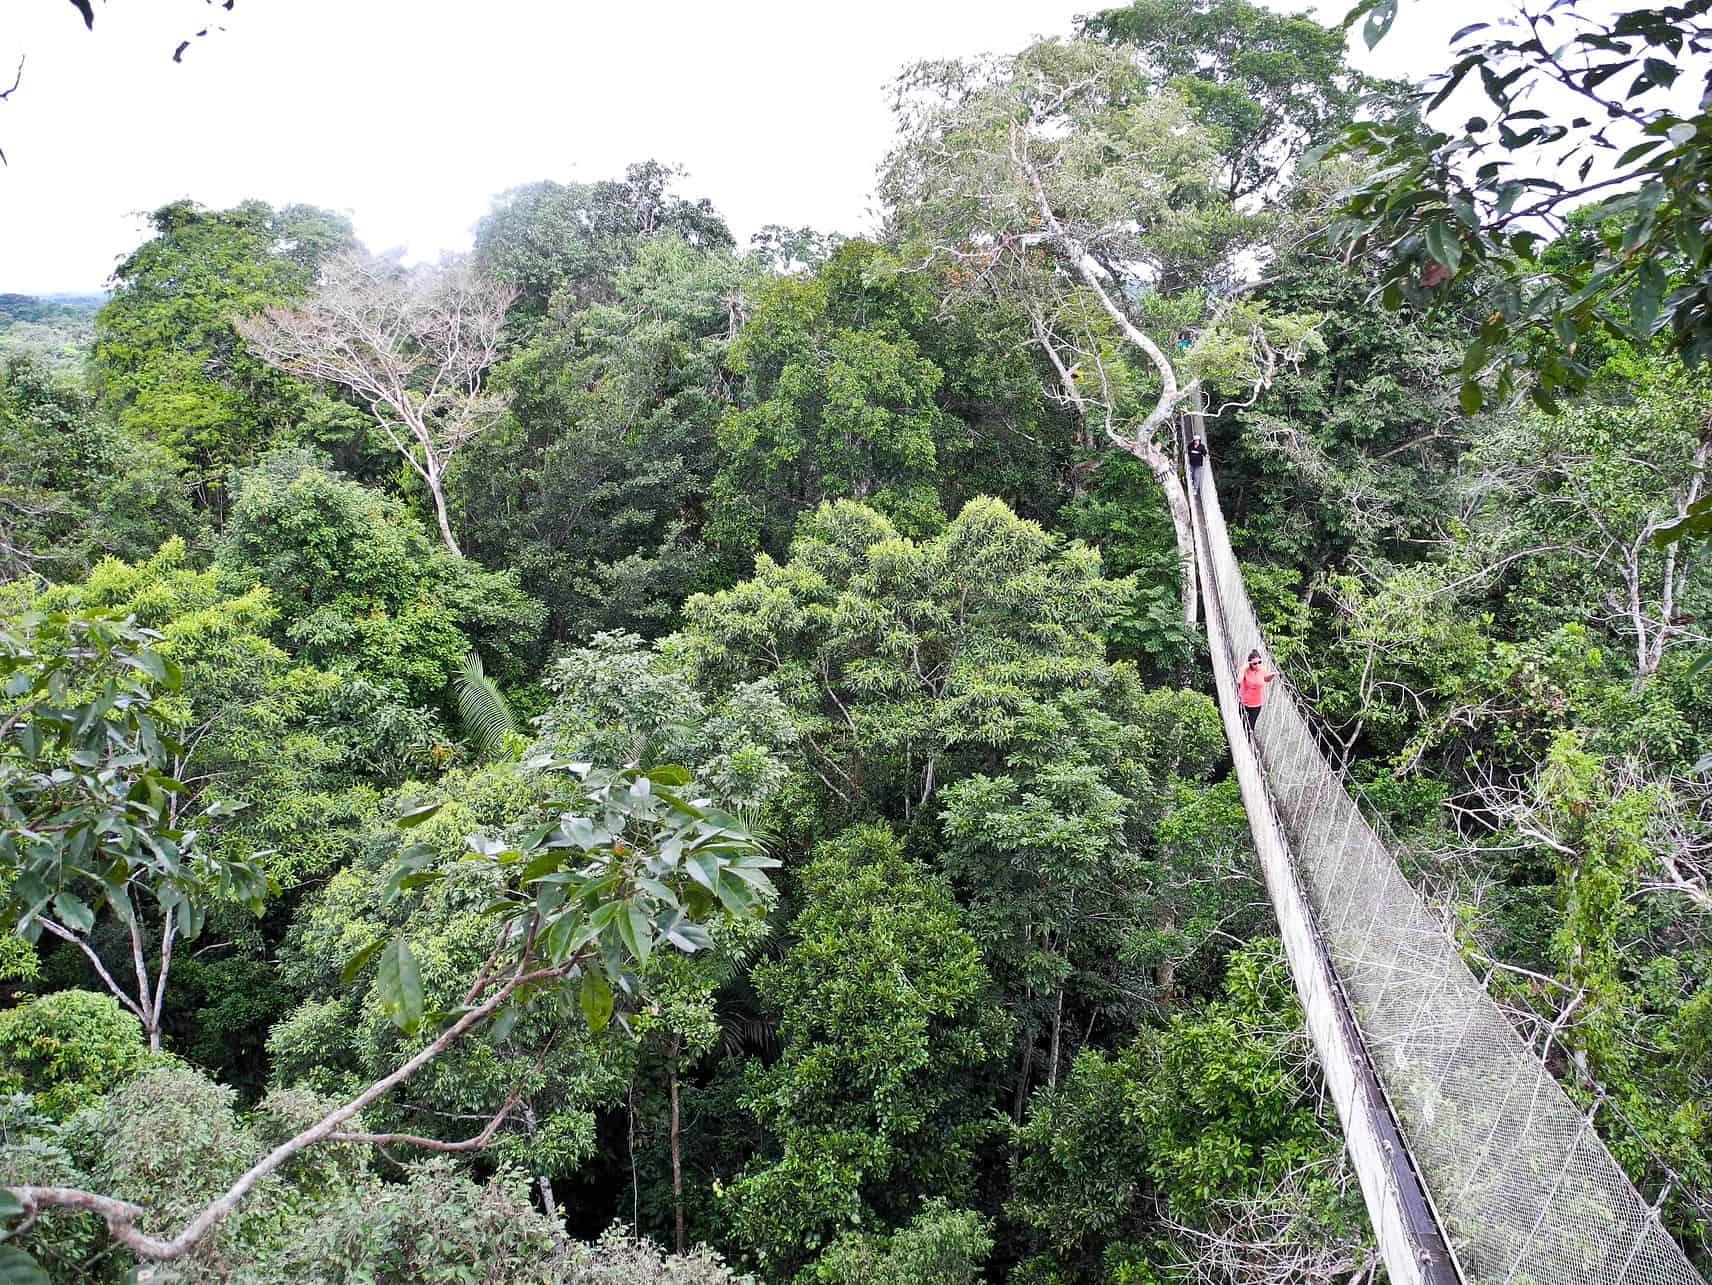 Canopy-walk at the Amazonas River in Peru.